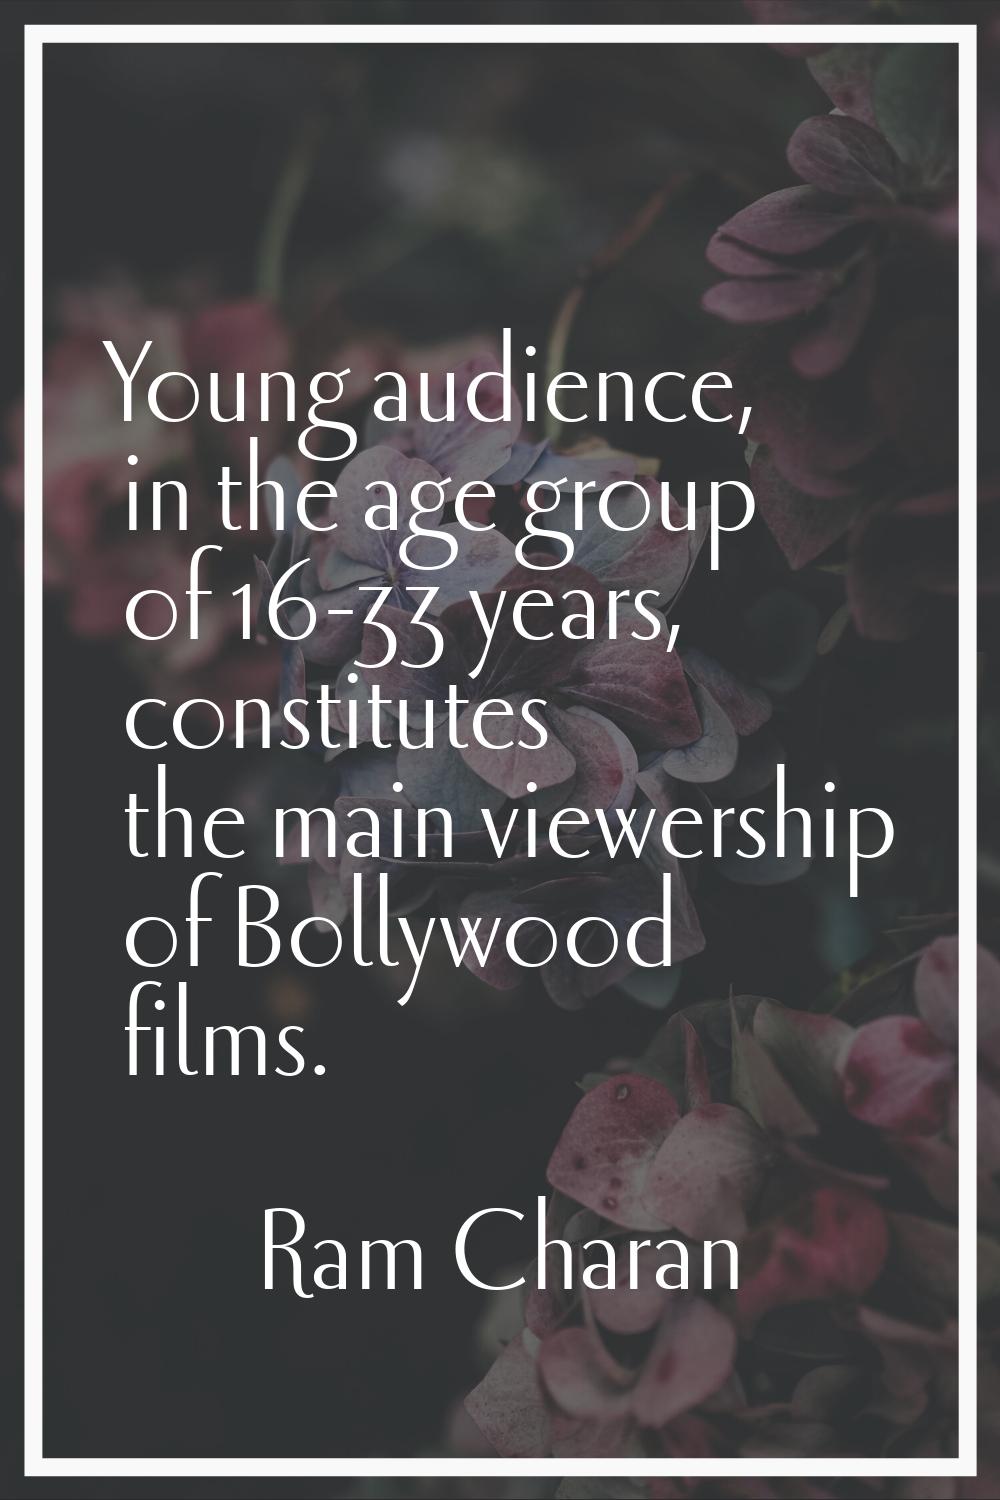 Young audience, in the age group of 16-33 years, constitutes the main viewership of Bollywood films